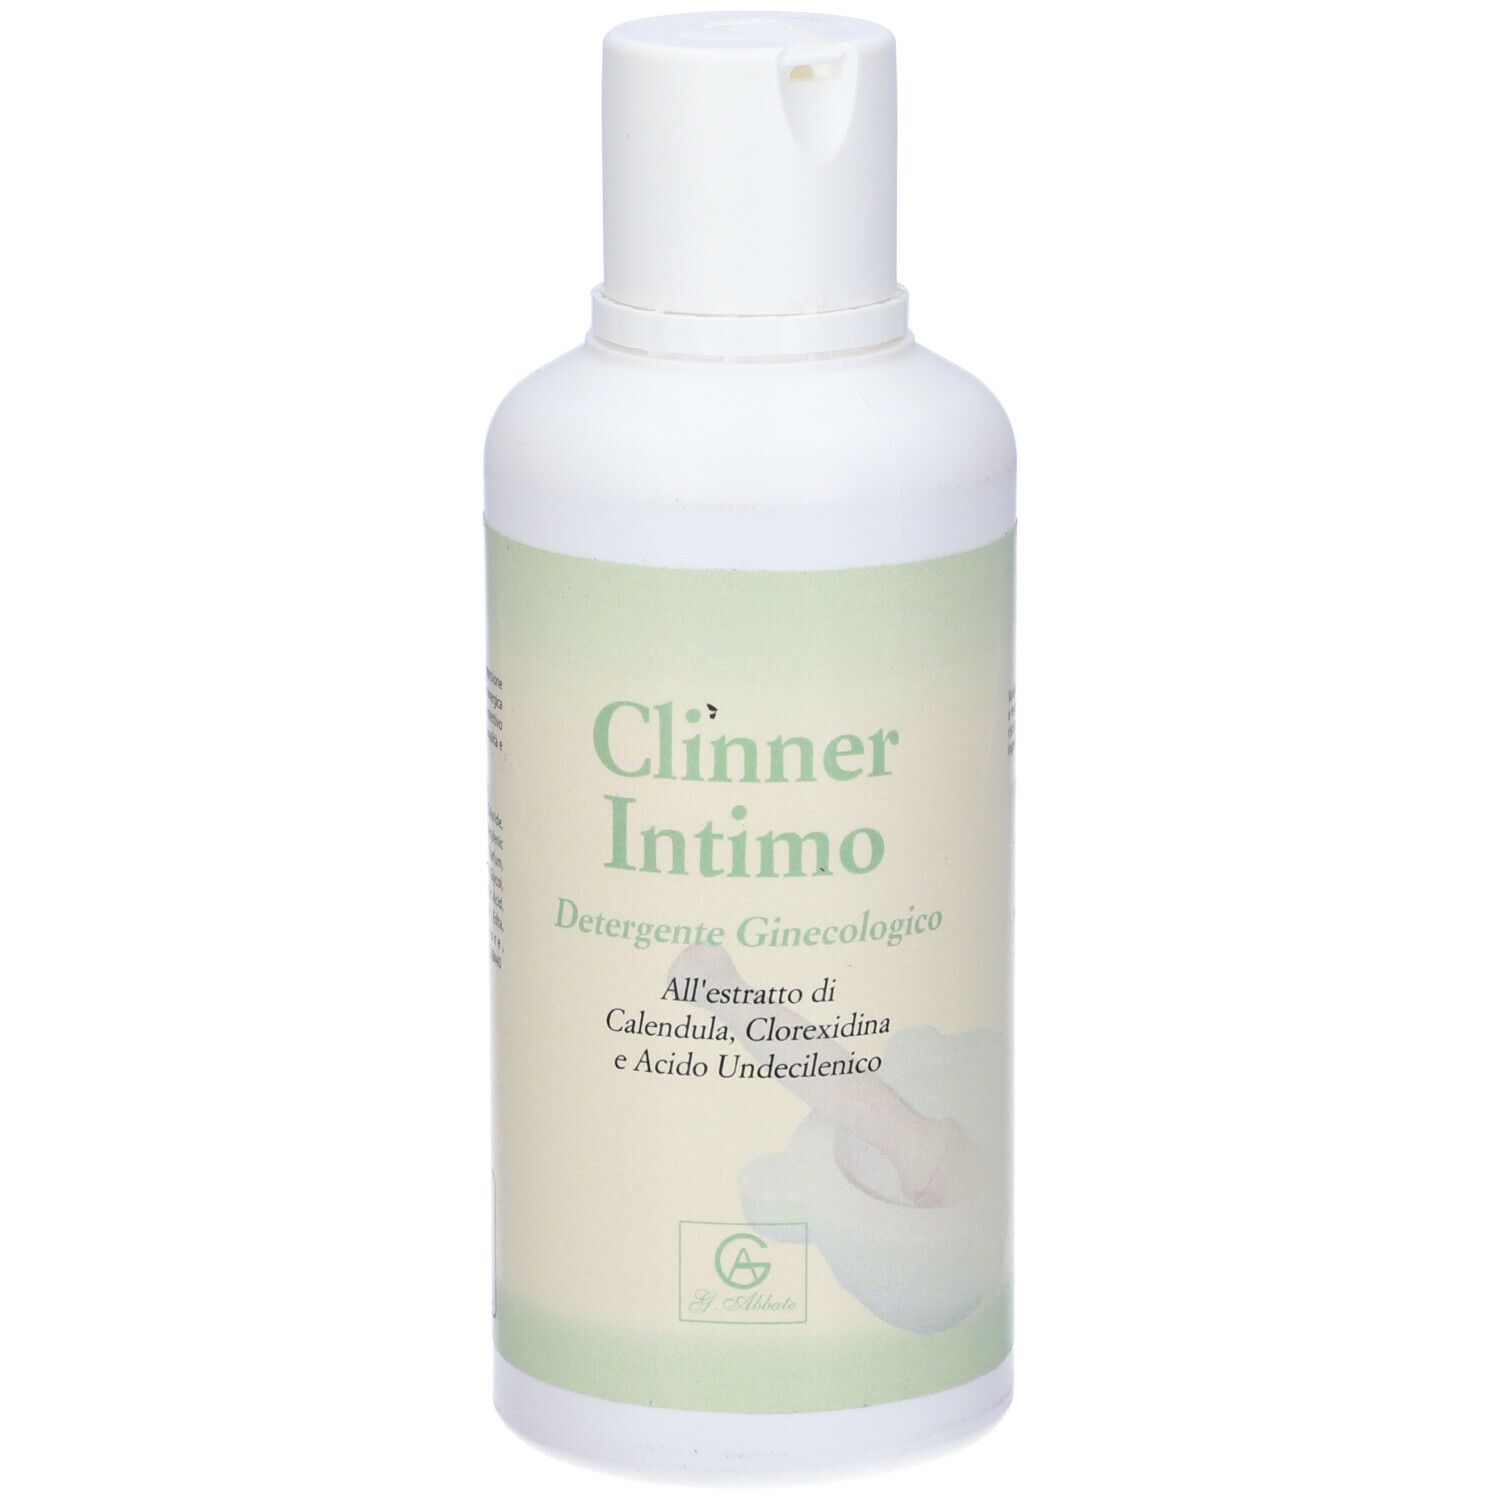 Image of Clinner Intimo Detergente